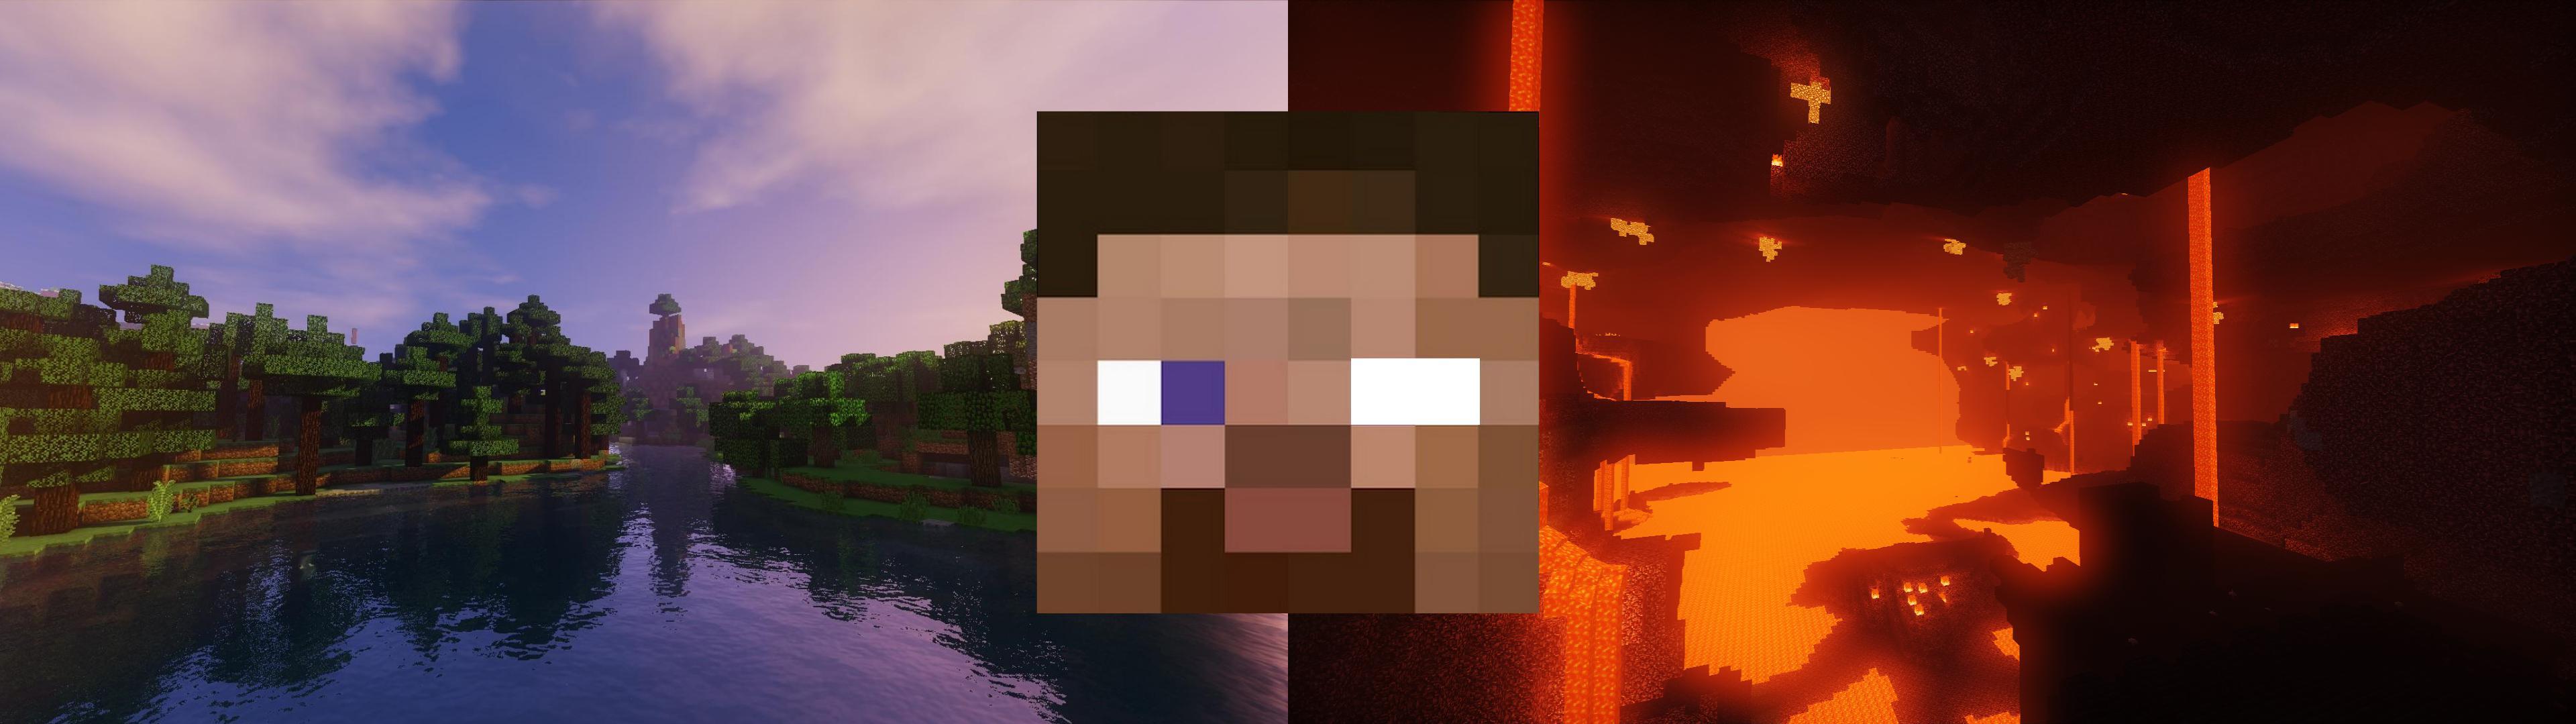 Decided to make a dual monitor minecraft wallpaper as there arent